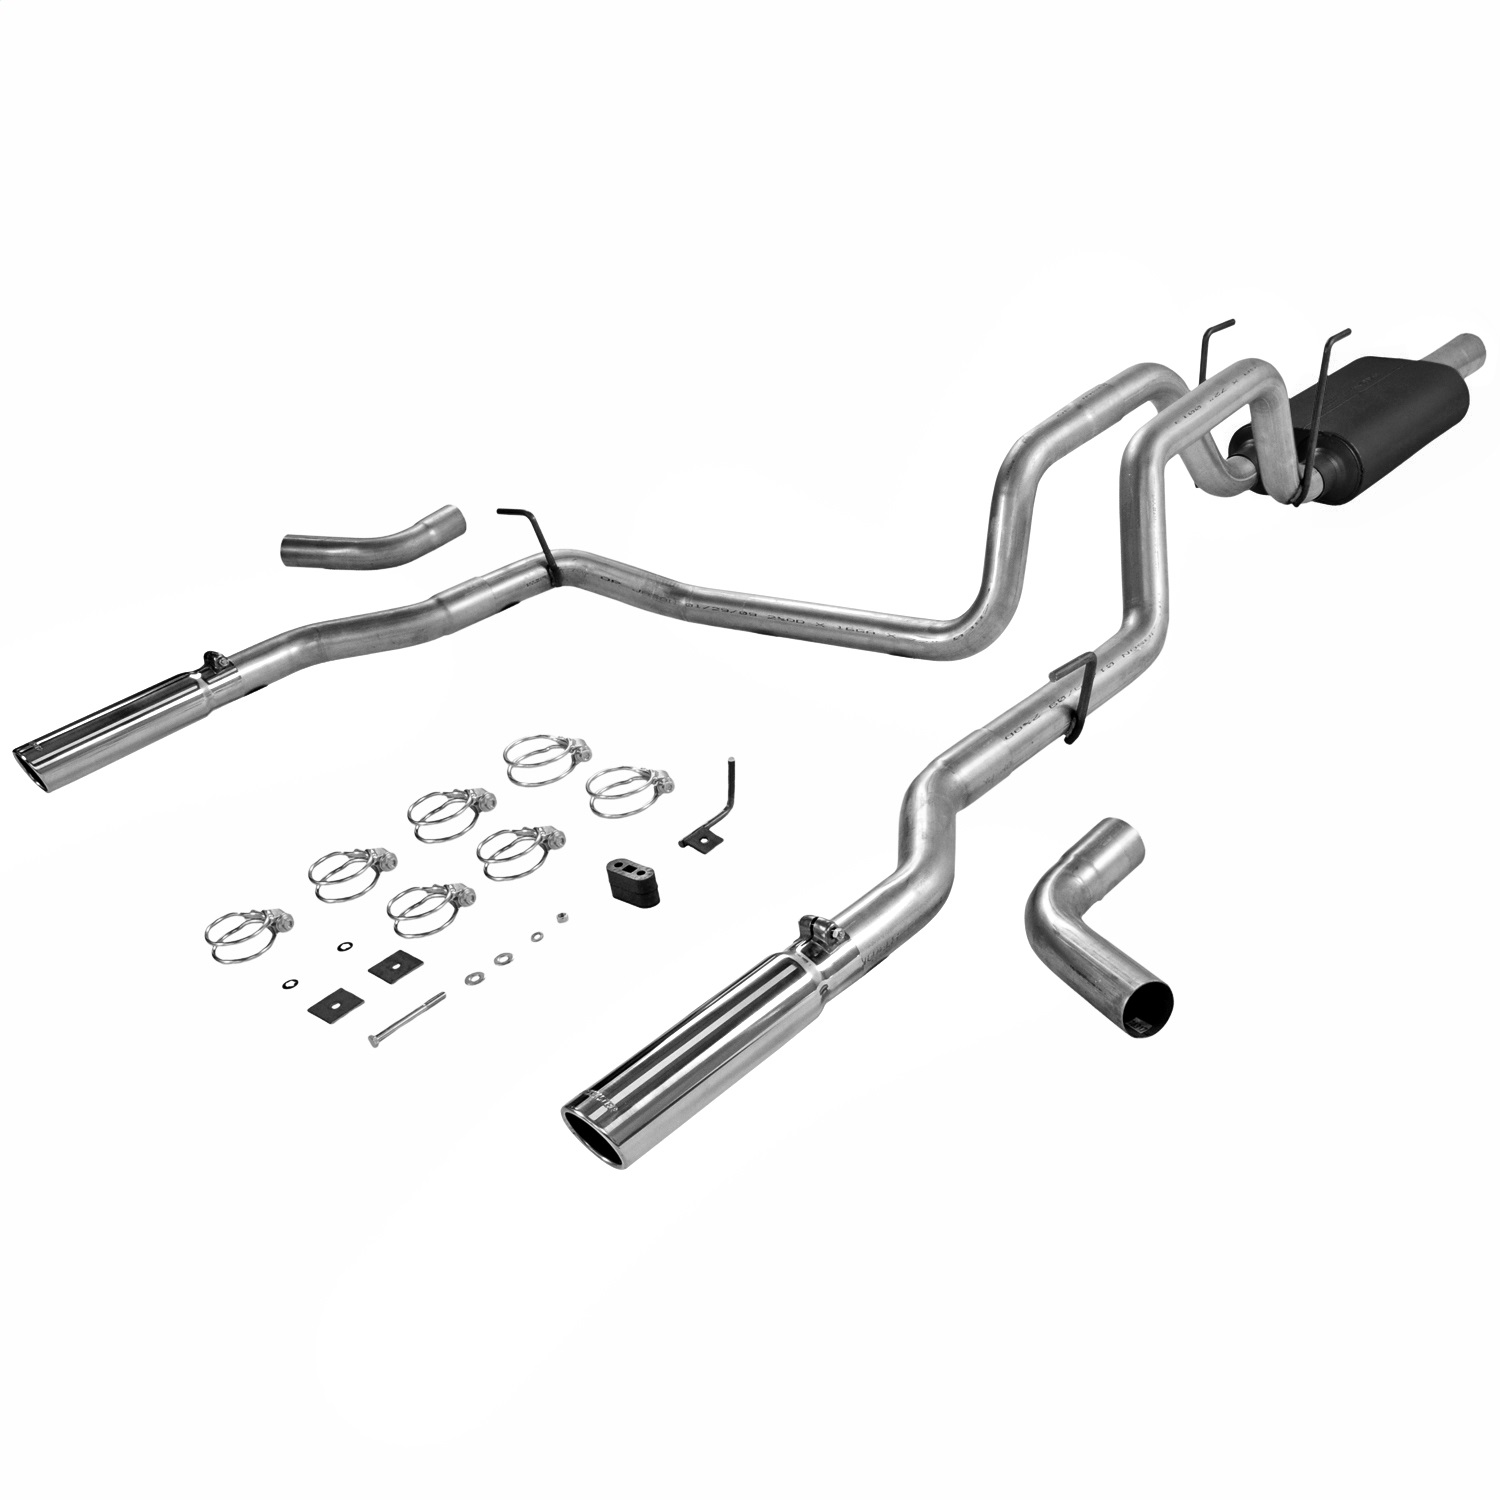 Flowmaster Flowmaster 17424 American Thunder Cat Back Exhaust System Fits 06-08 Ram 1500